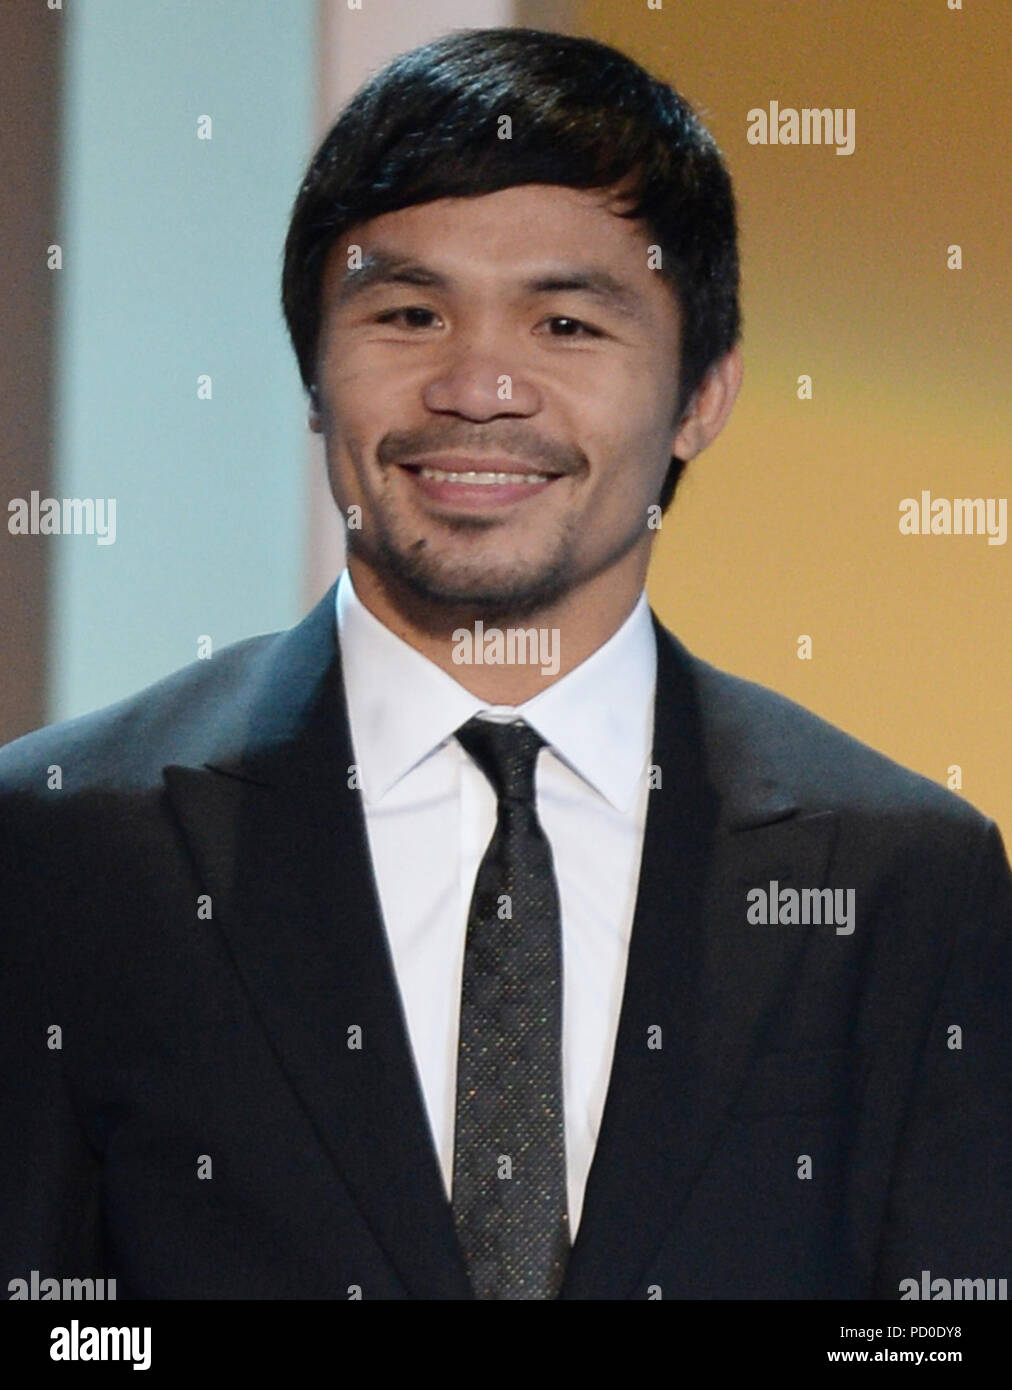 DORAL, FL - JANUARY 25:  Manny Pacquiao on stage at the 63rd Annual Miss Universe Pageant at Trump National Doral on January 25, 2015 in Doral, Florida.  People:  Manny Pacquiao Stock Photo